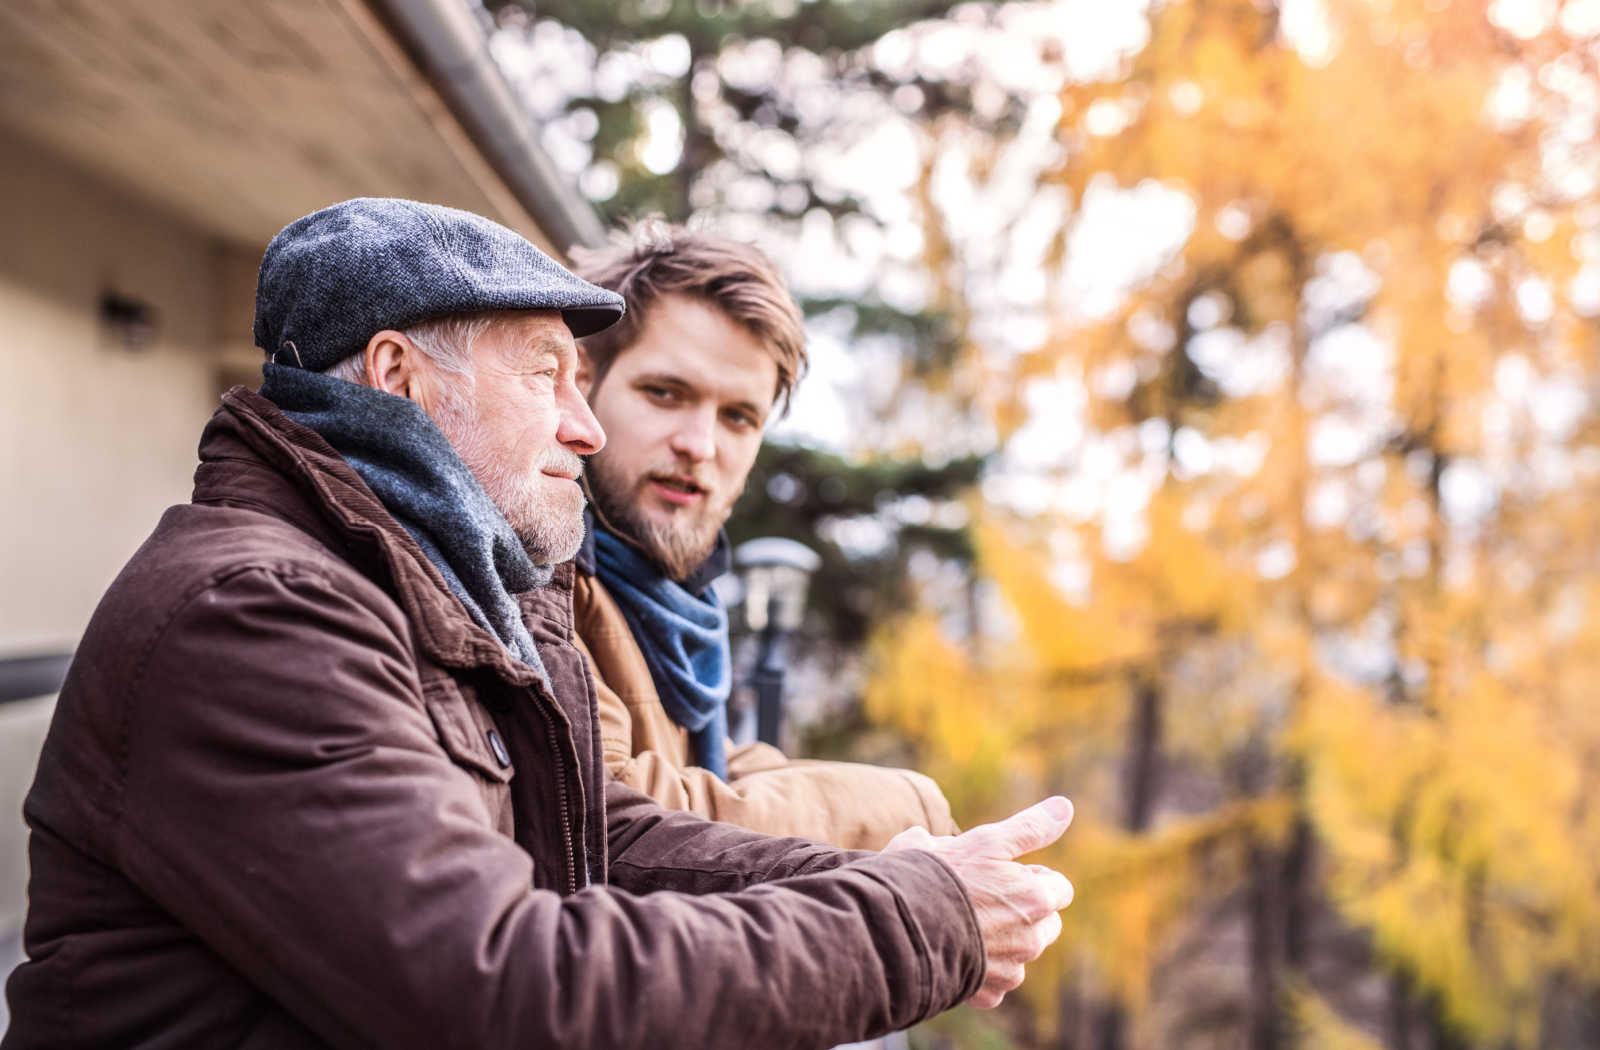 Young man outside in the fall leaning on a railing and speaking to a senior man who is doing the same